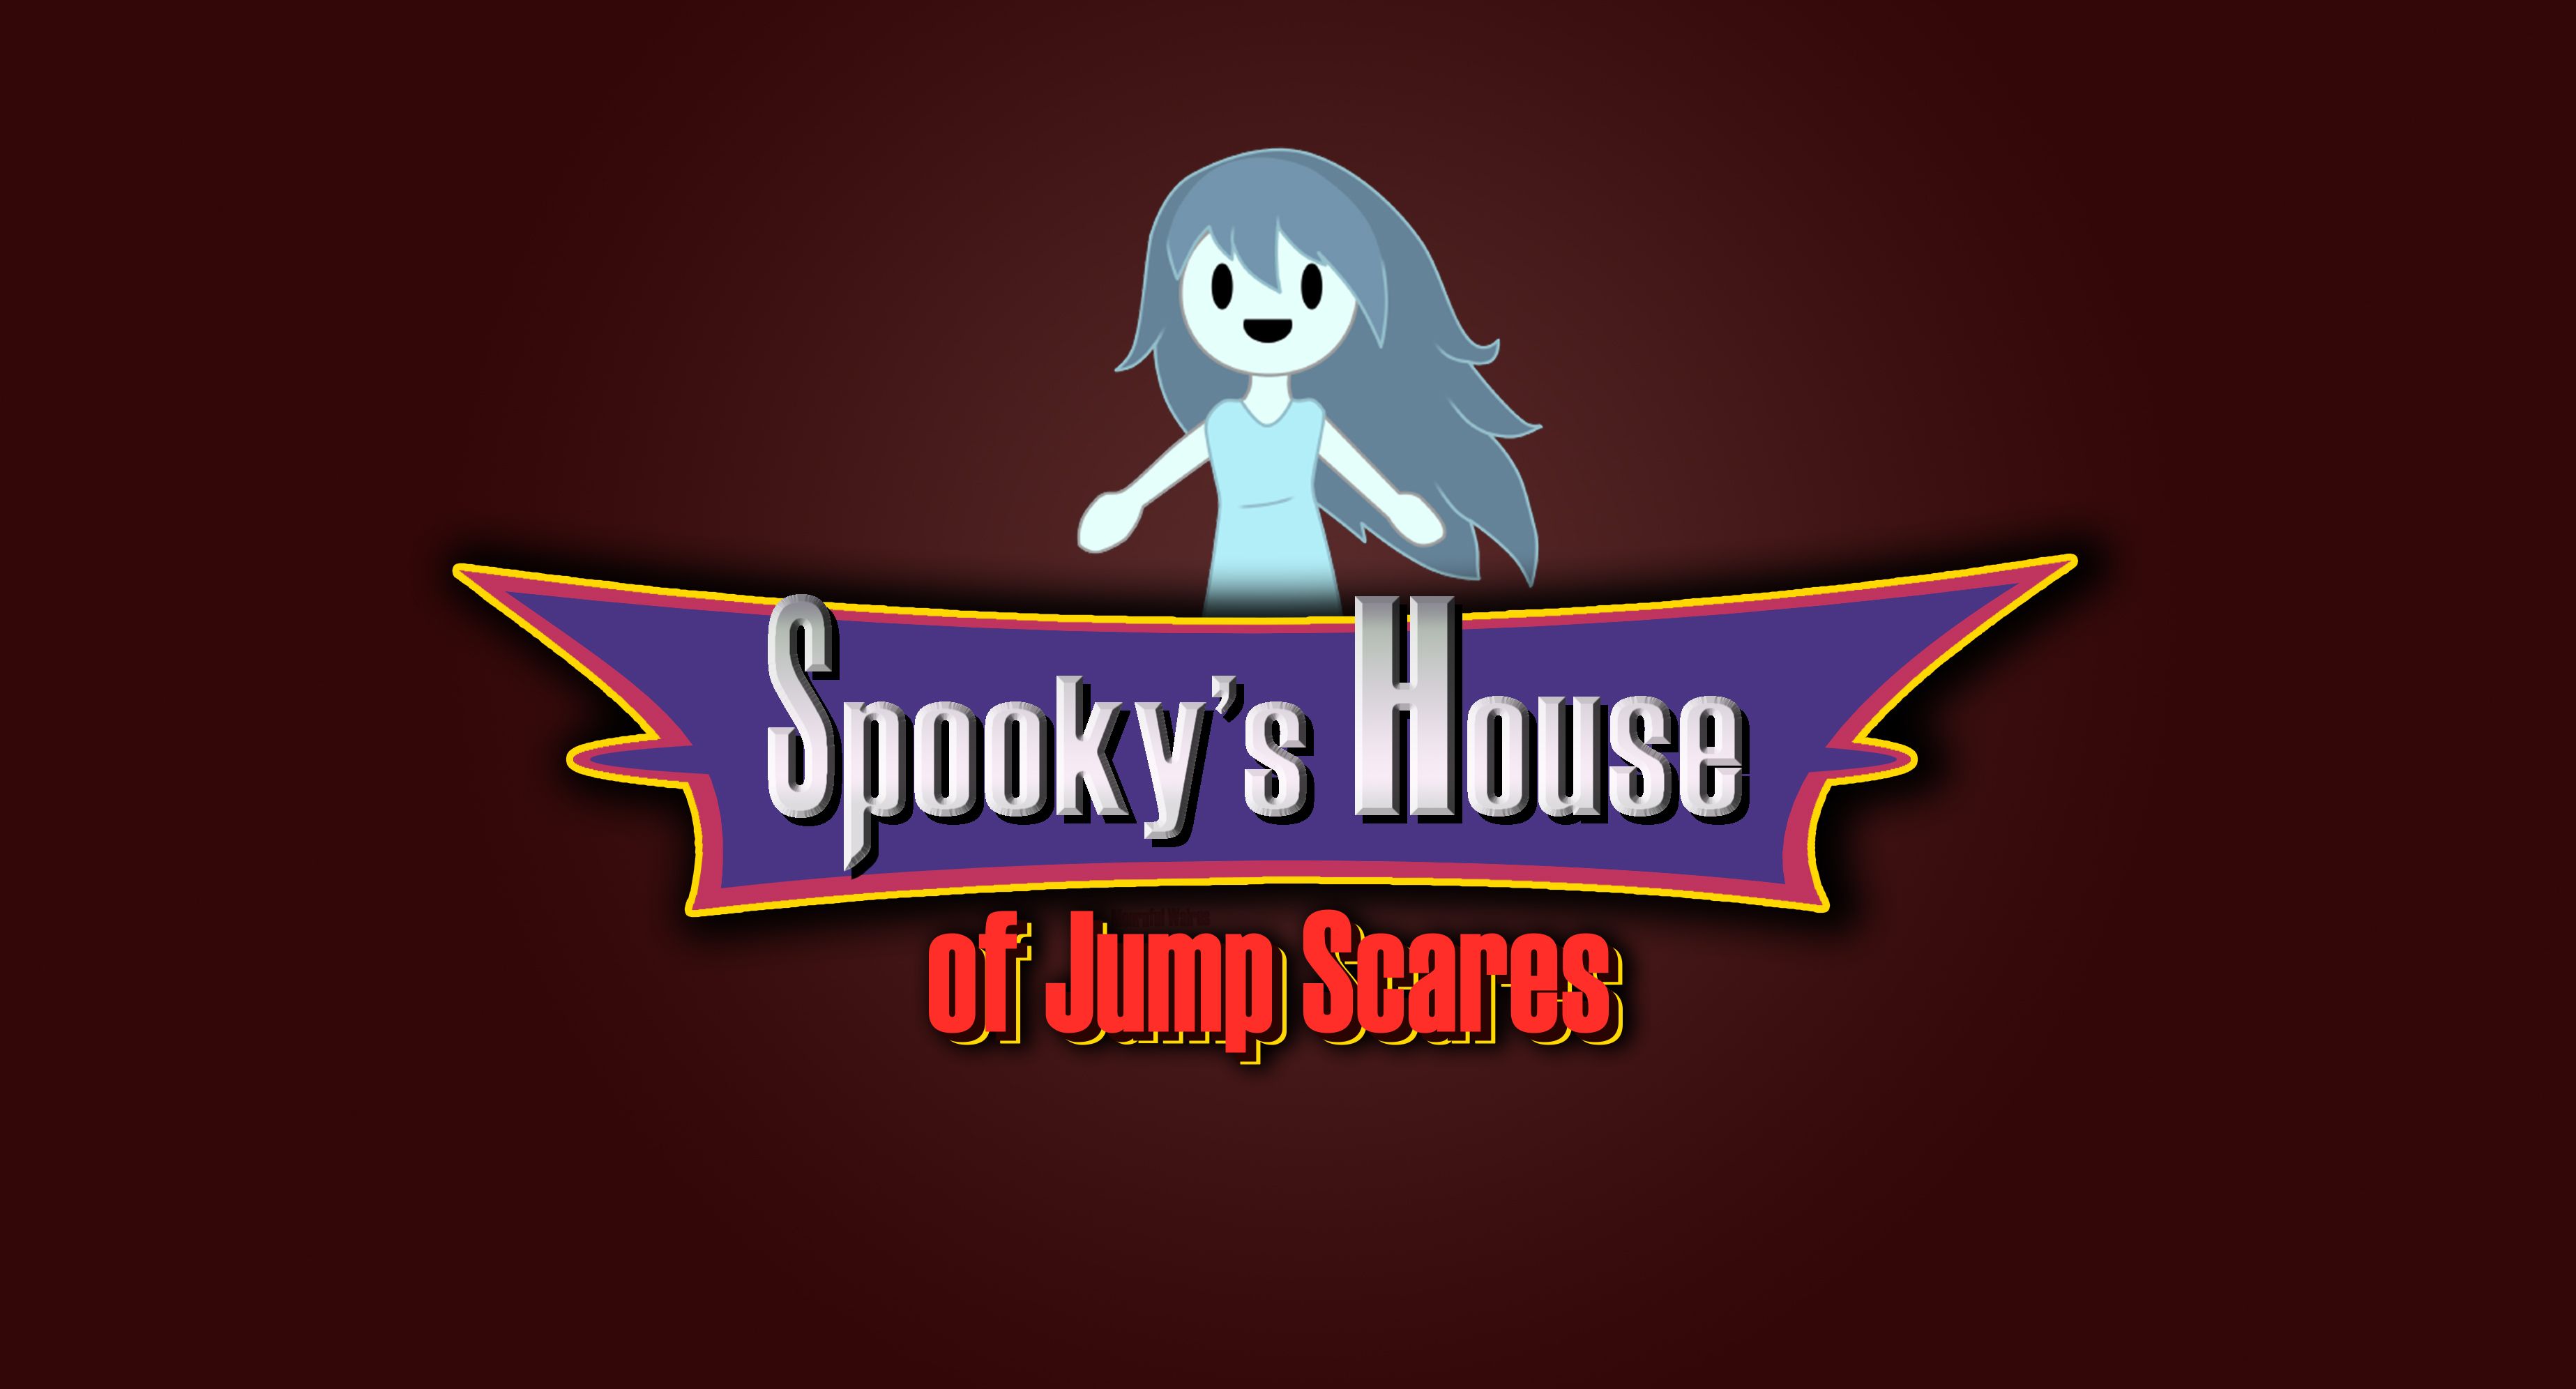 Made one for Spooky's House Of Jump Scares